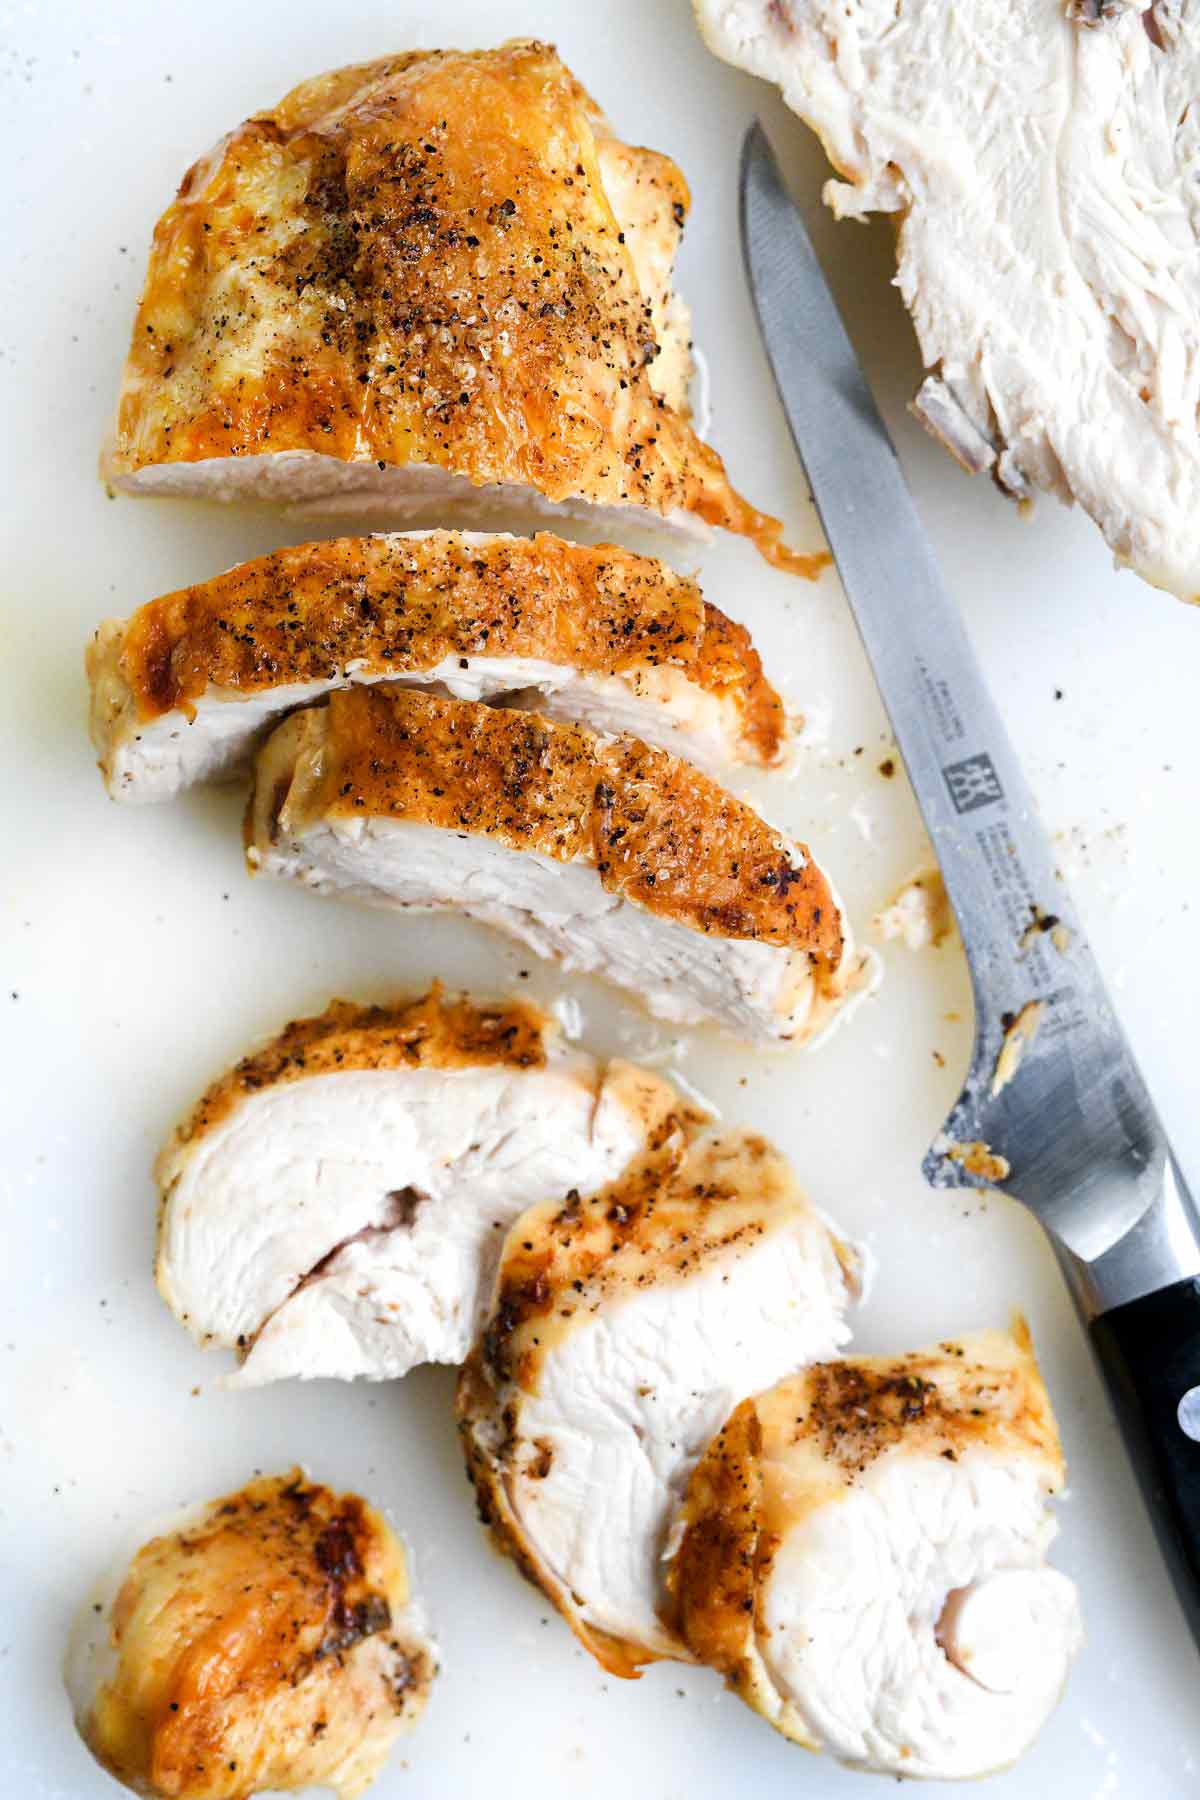 The Best Baked Chicken Breast Recipe So Juicy Foodiecrush Com